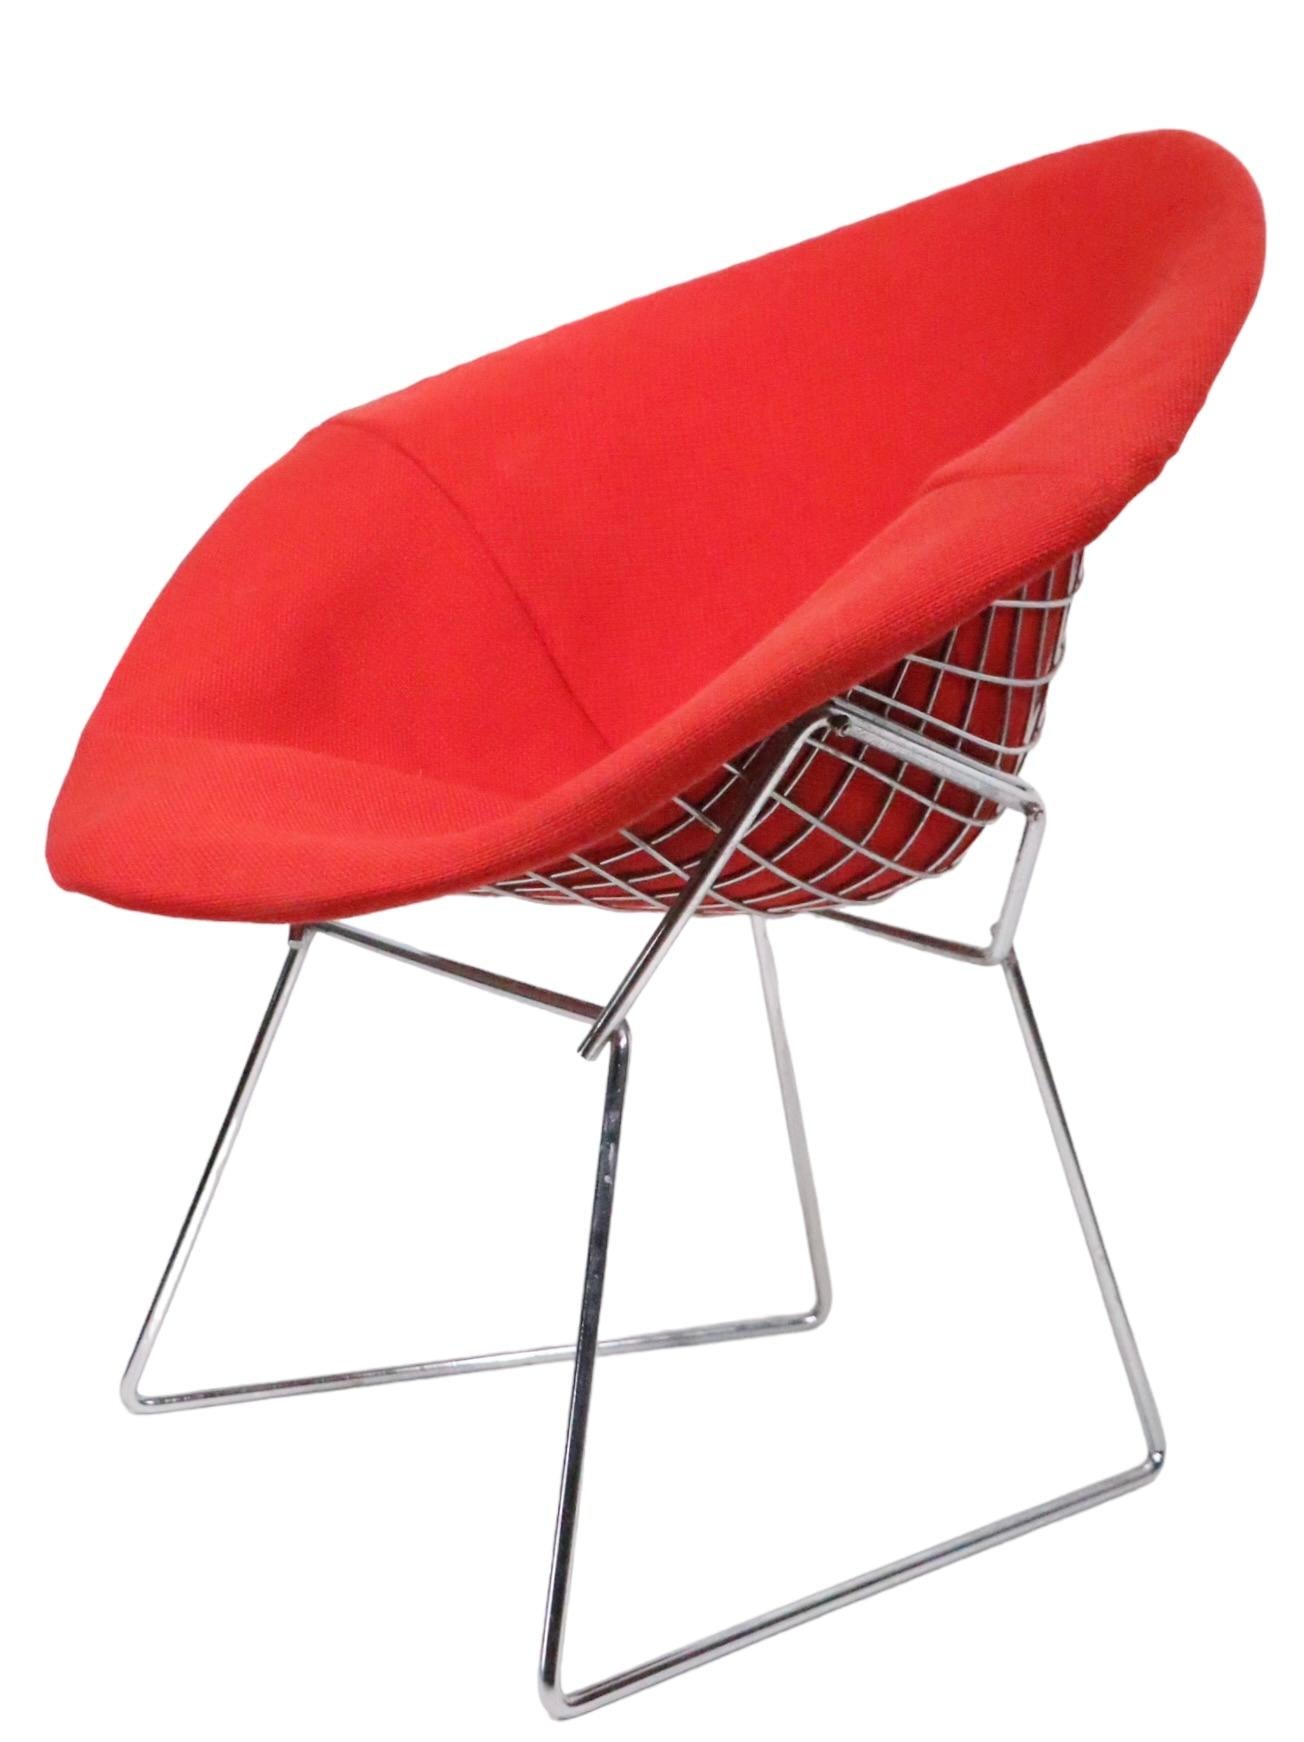 Bertoia for Knoll Chrome Diamond Chair with Full Pad Cover C 1960/1970s For Sale 7